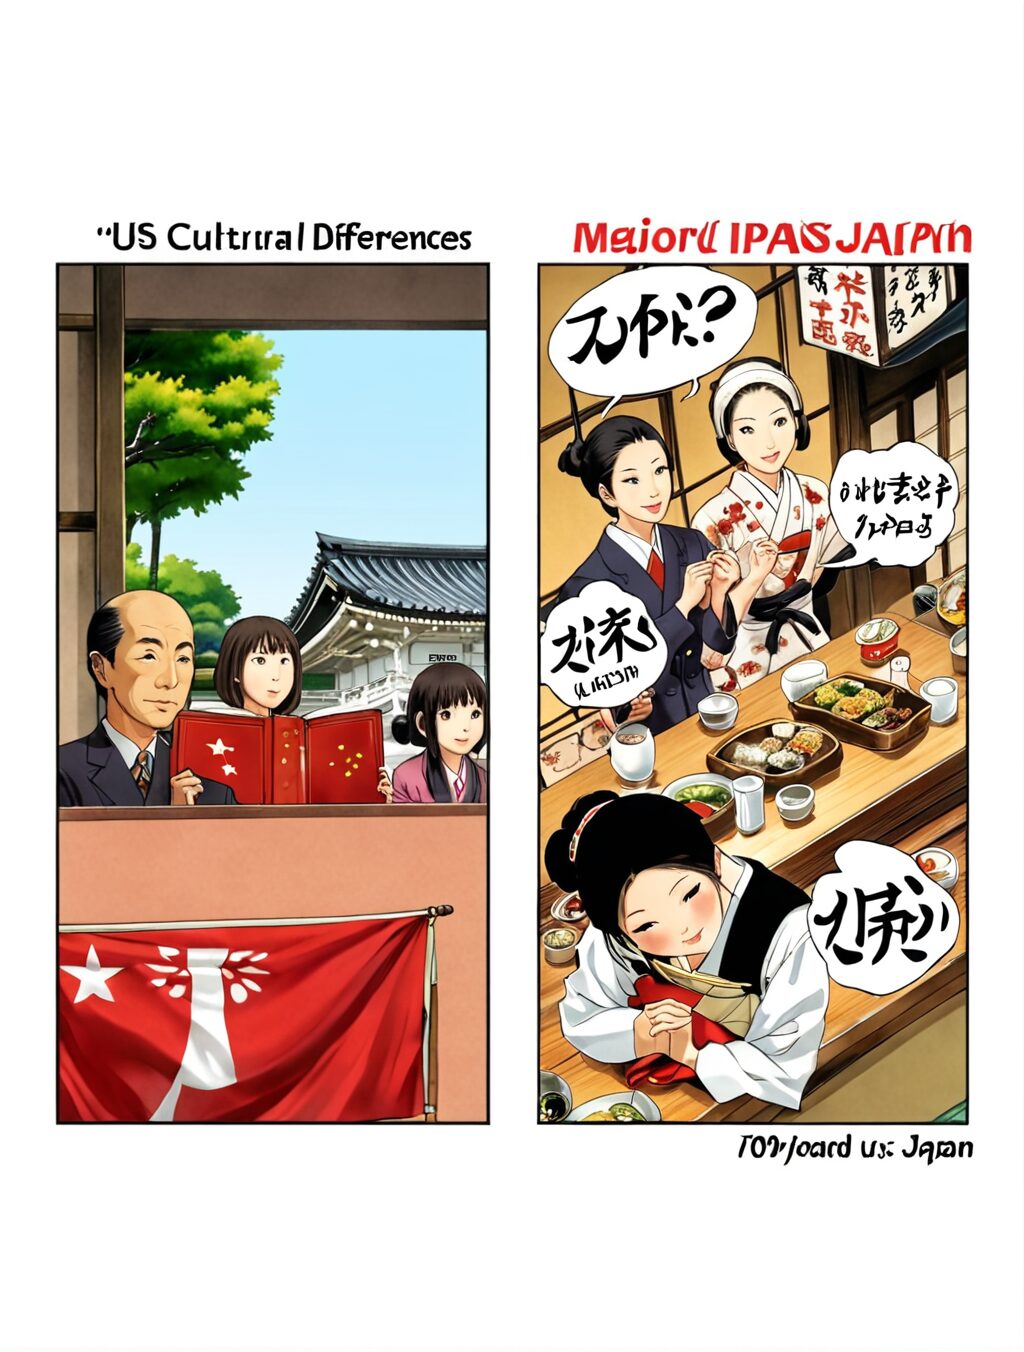 major cultural differences between us and japan